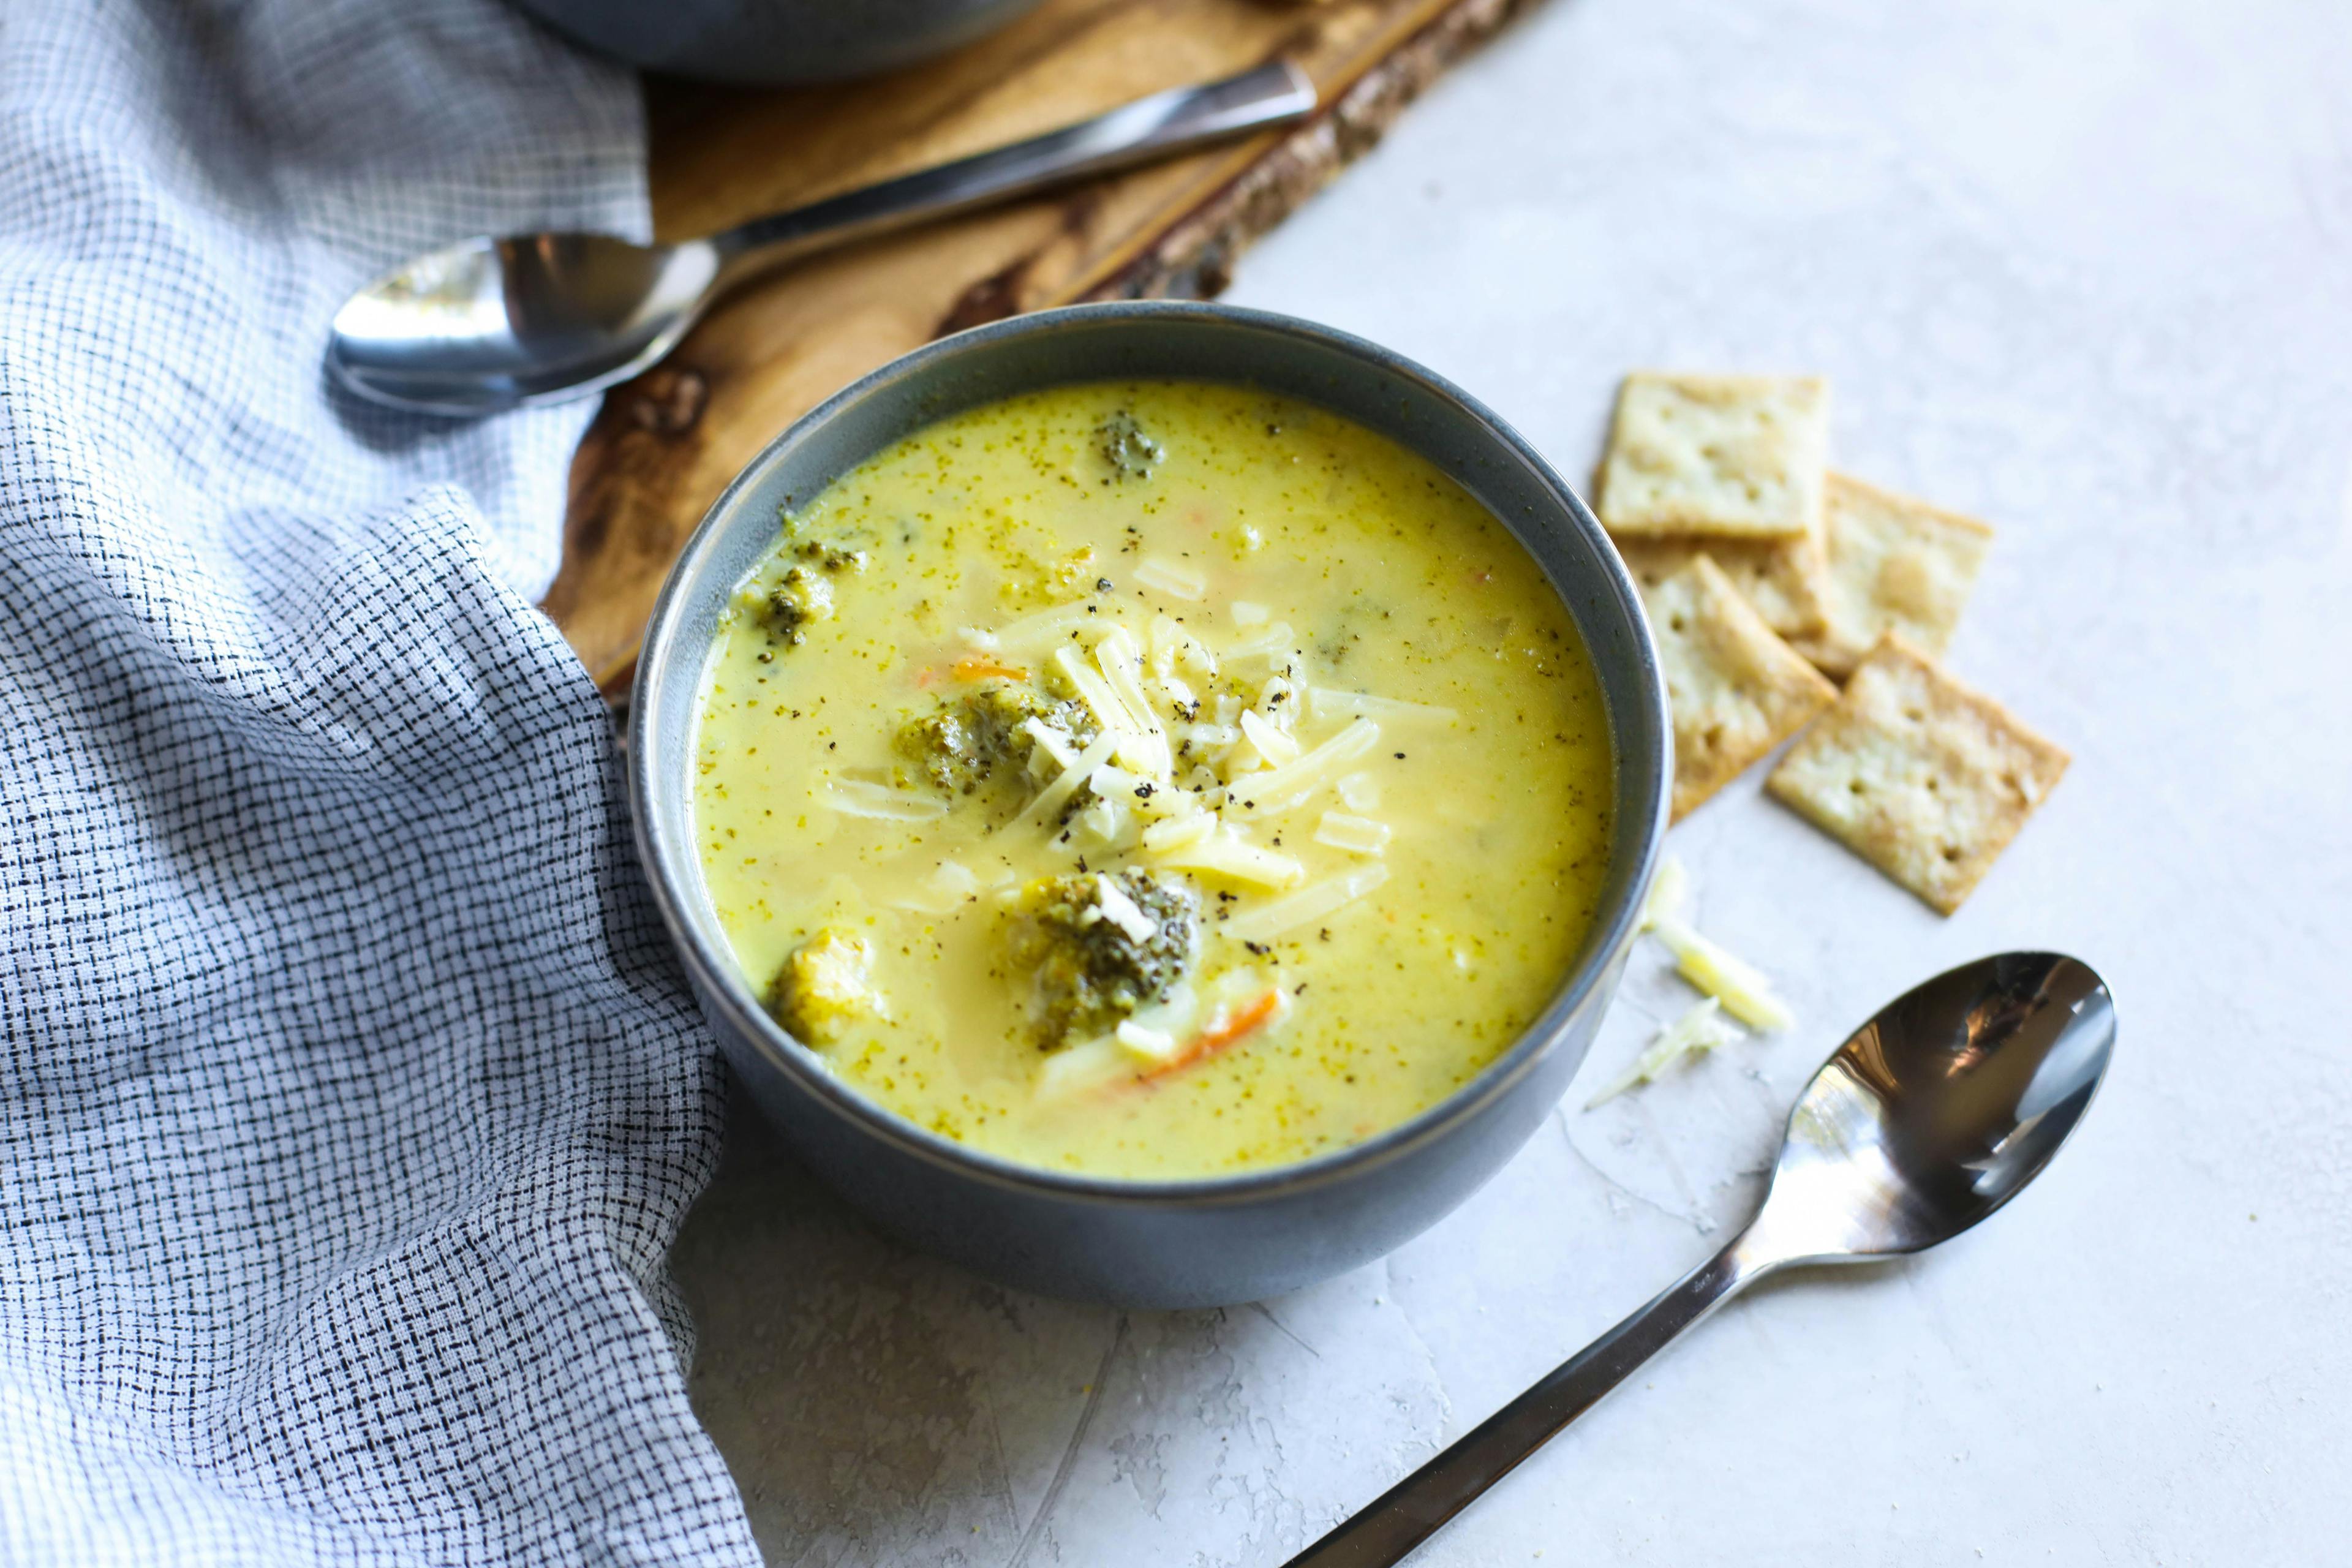 Slow Cooker Broccoli and Cheese Soup